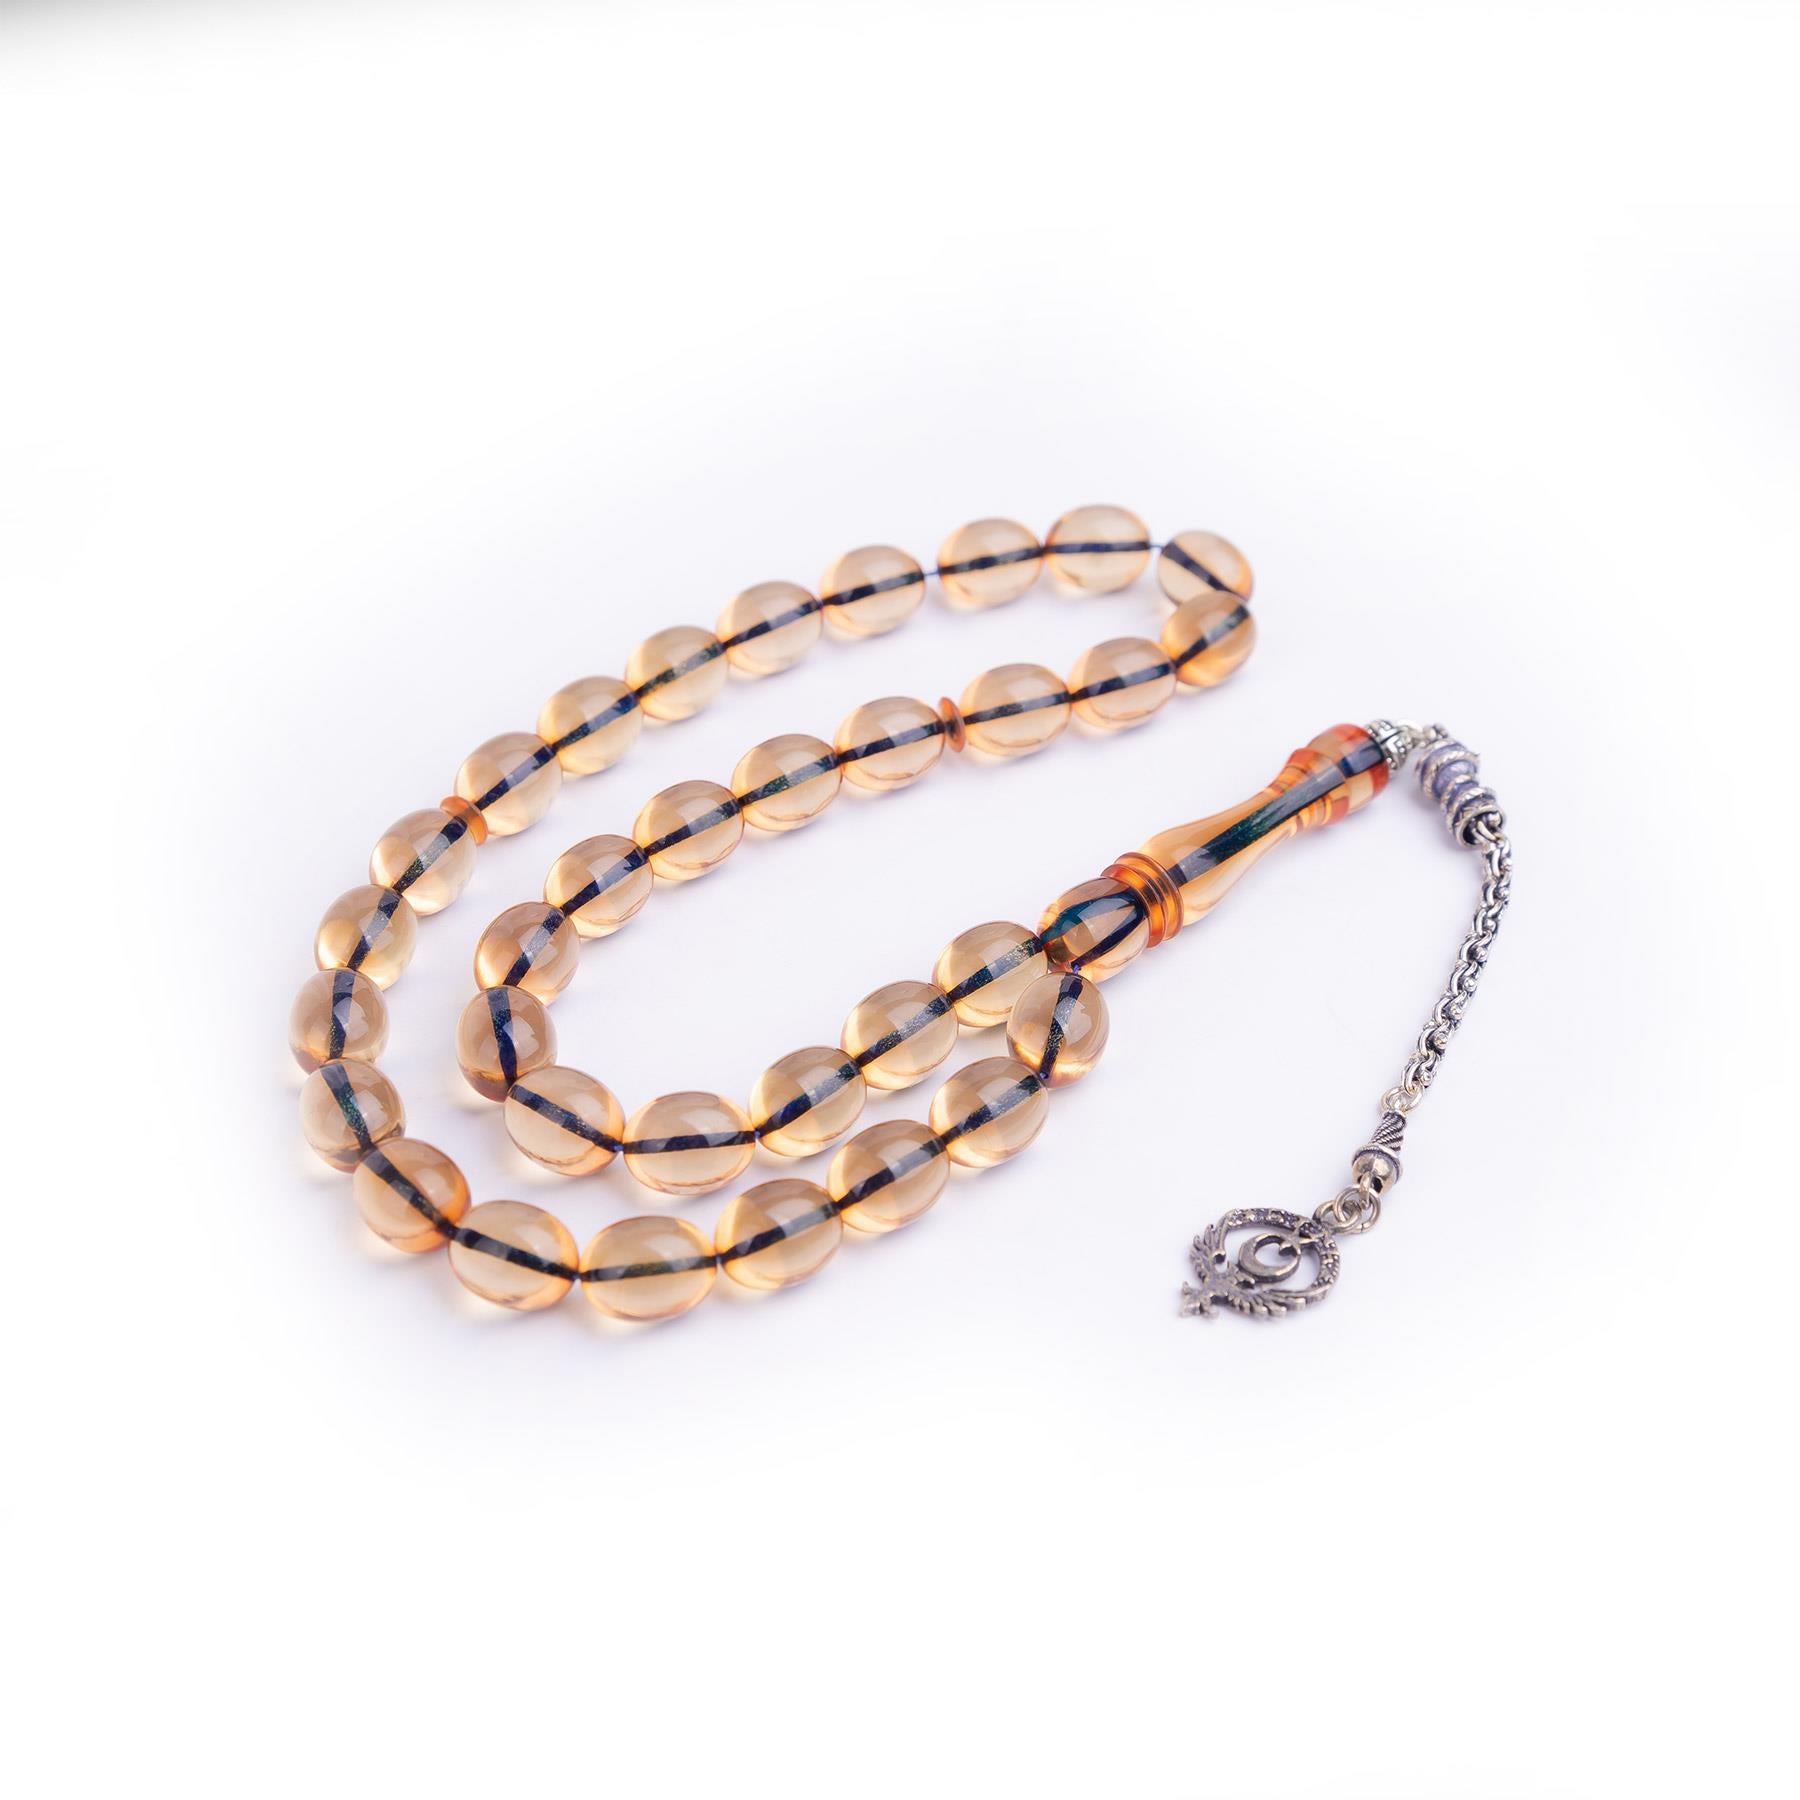 Ve Tesbih Solid Cut Fire Amber Rosary with Silver Tassels 4